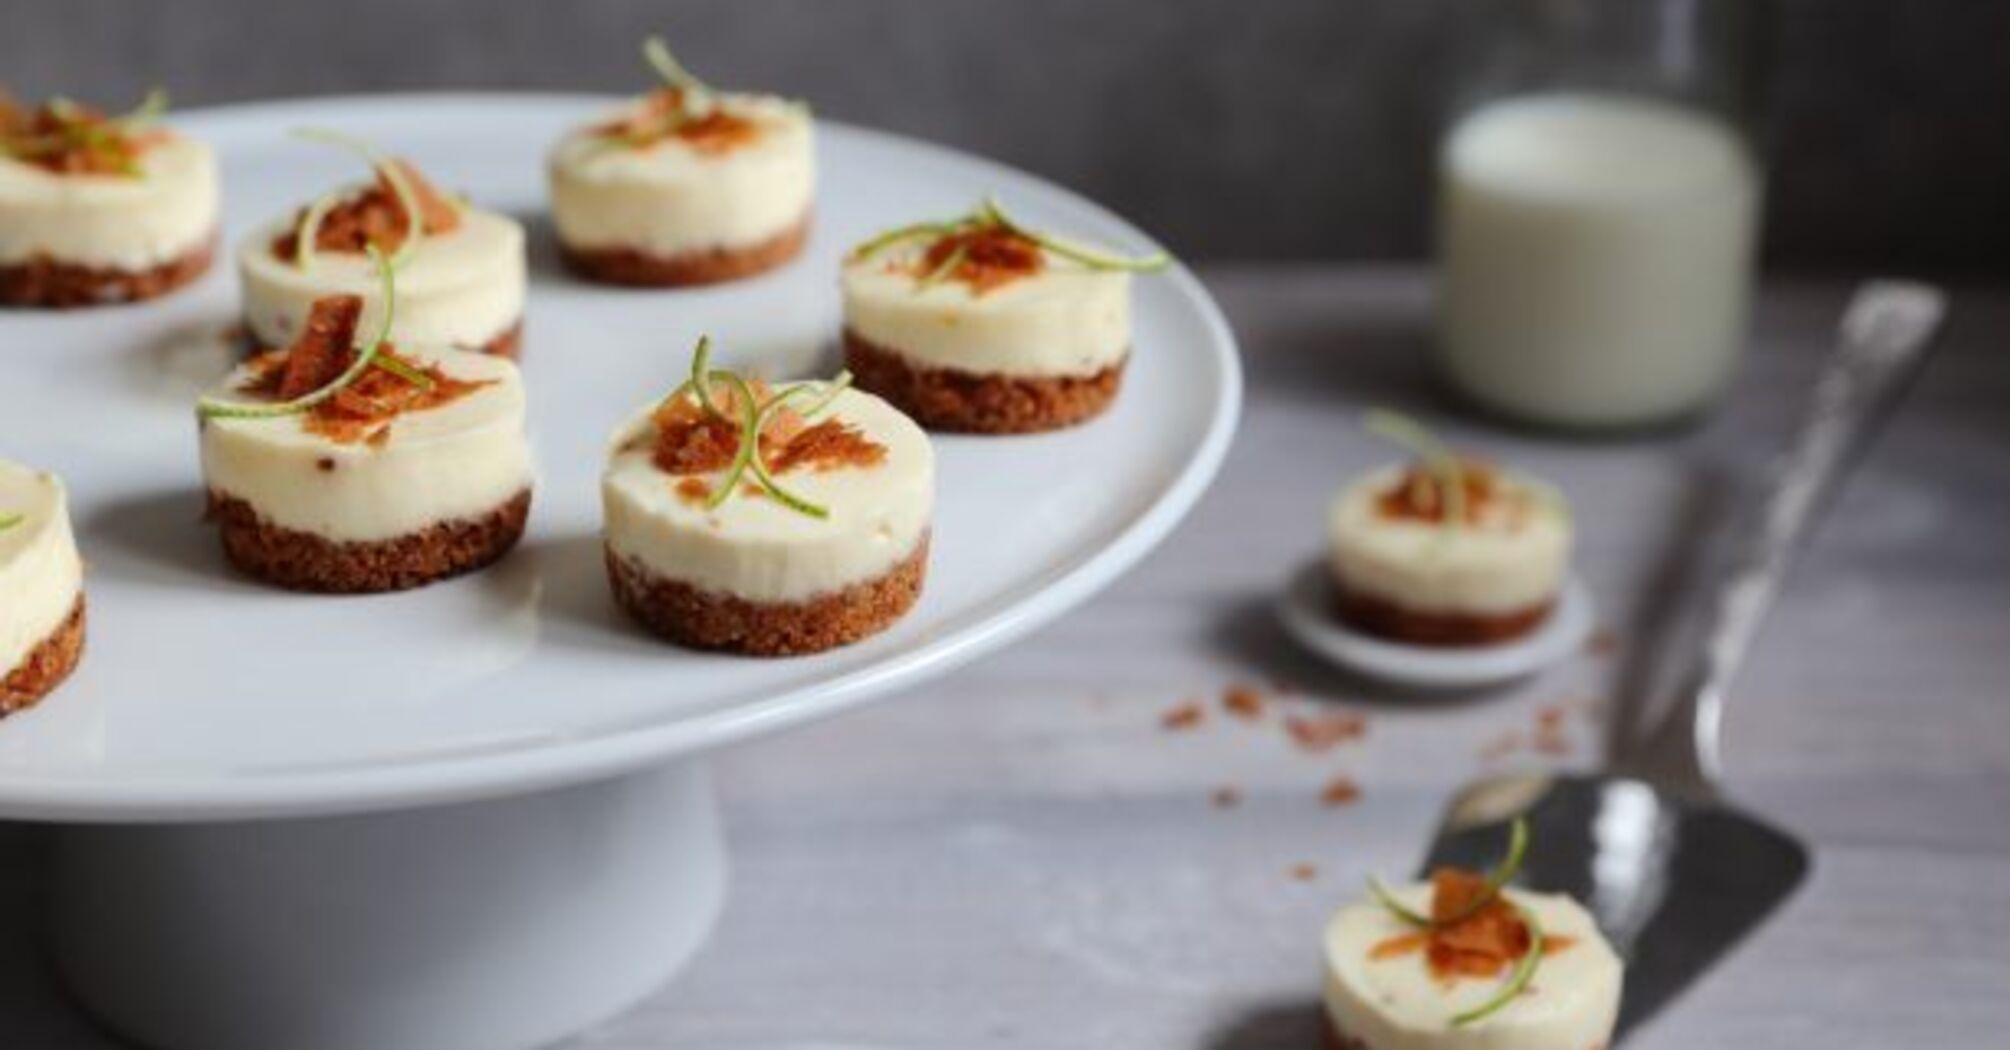 Fluffy mini cheesecakes: what kind of cheese to use